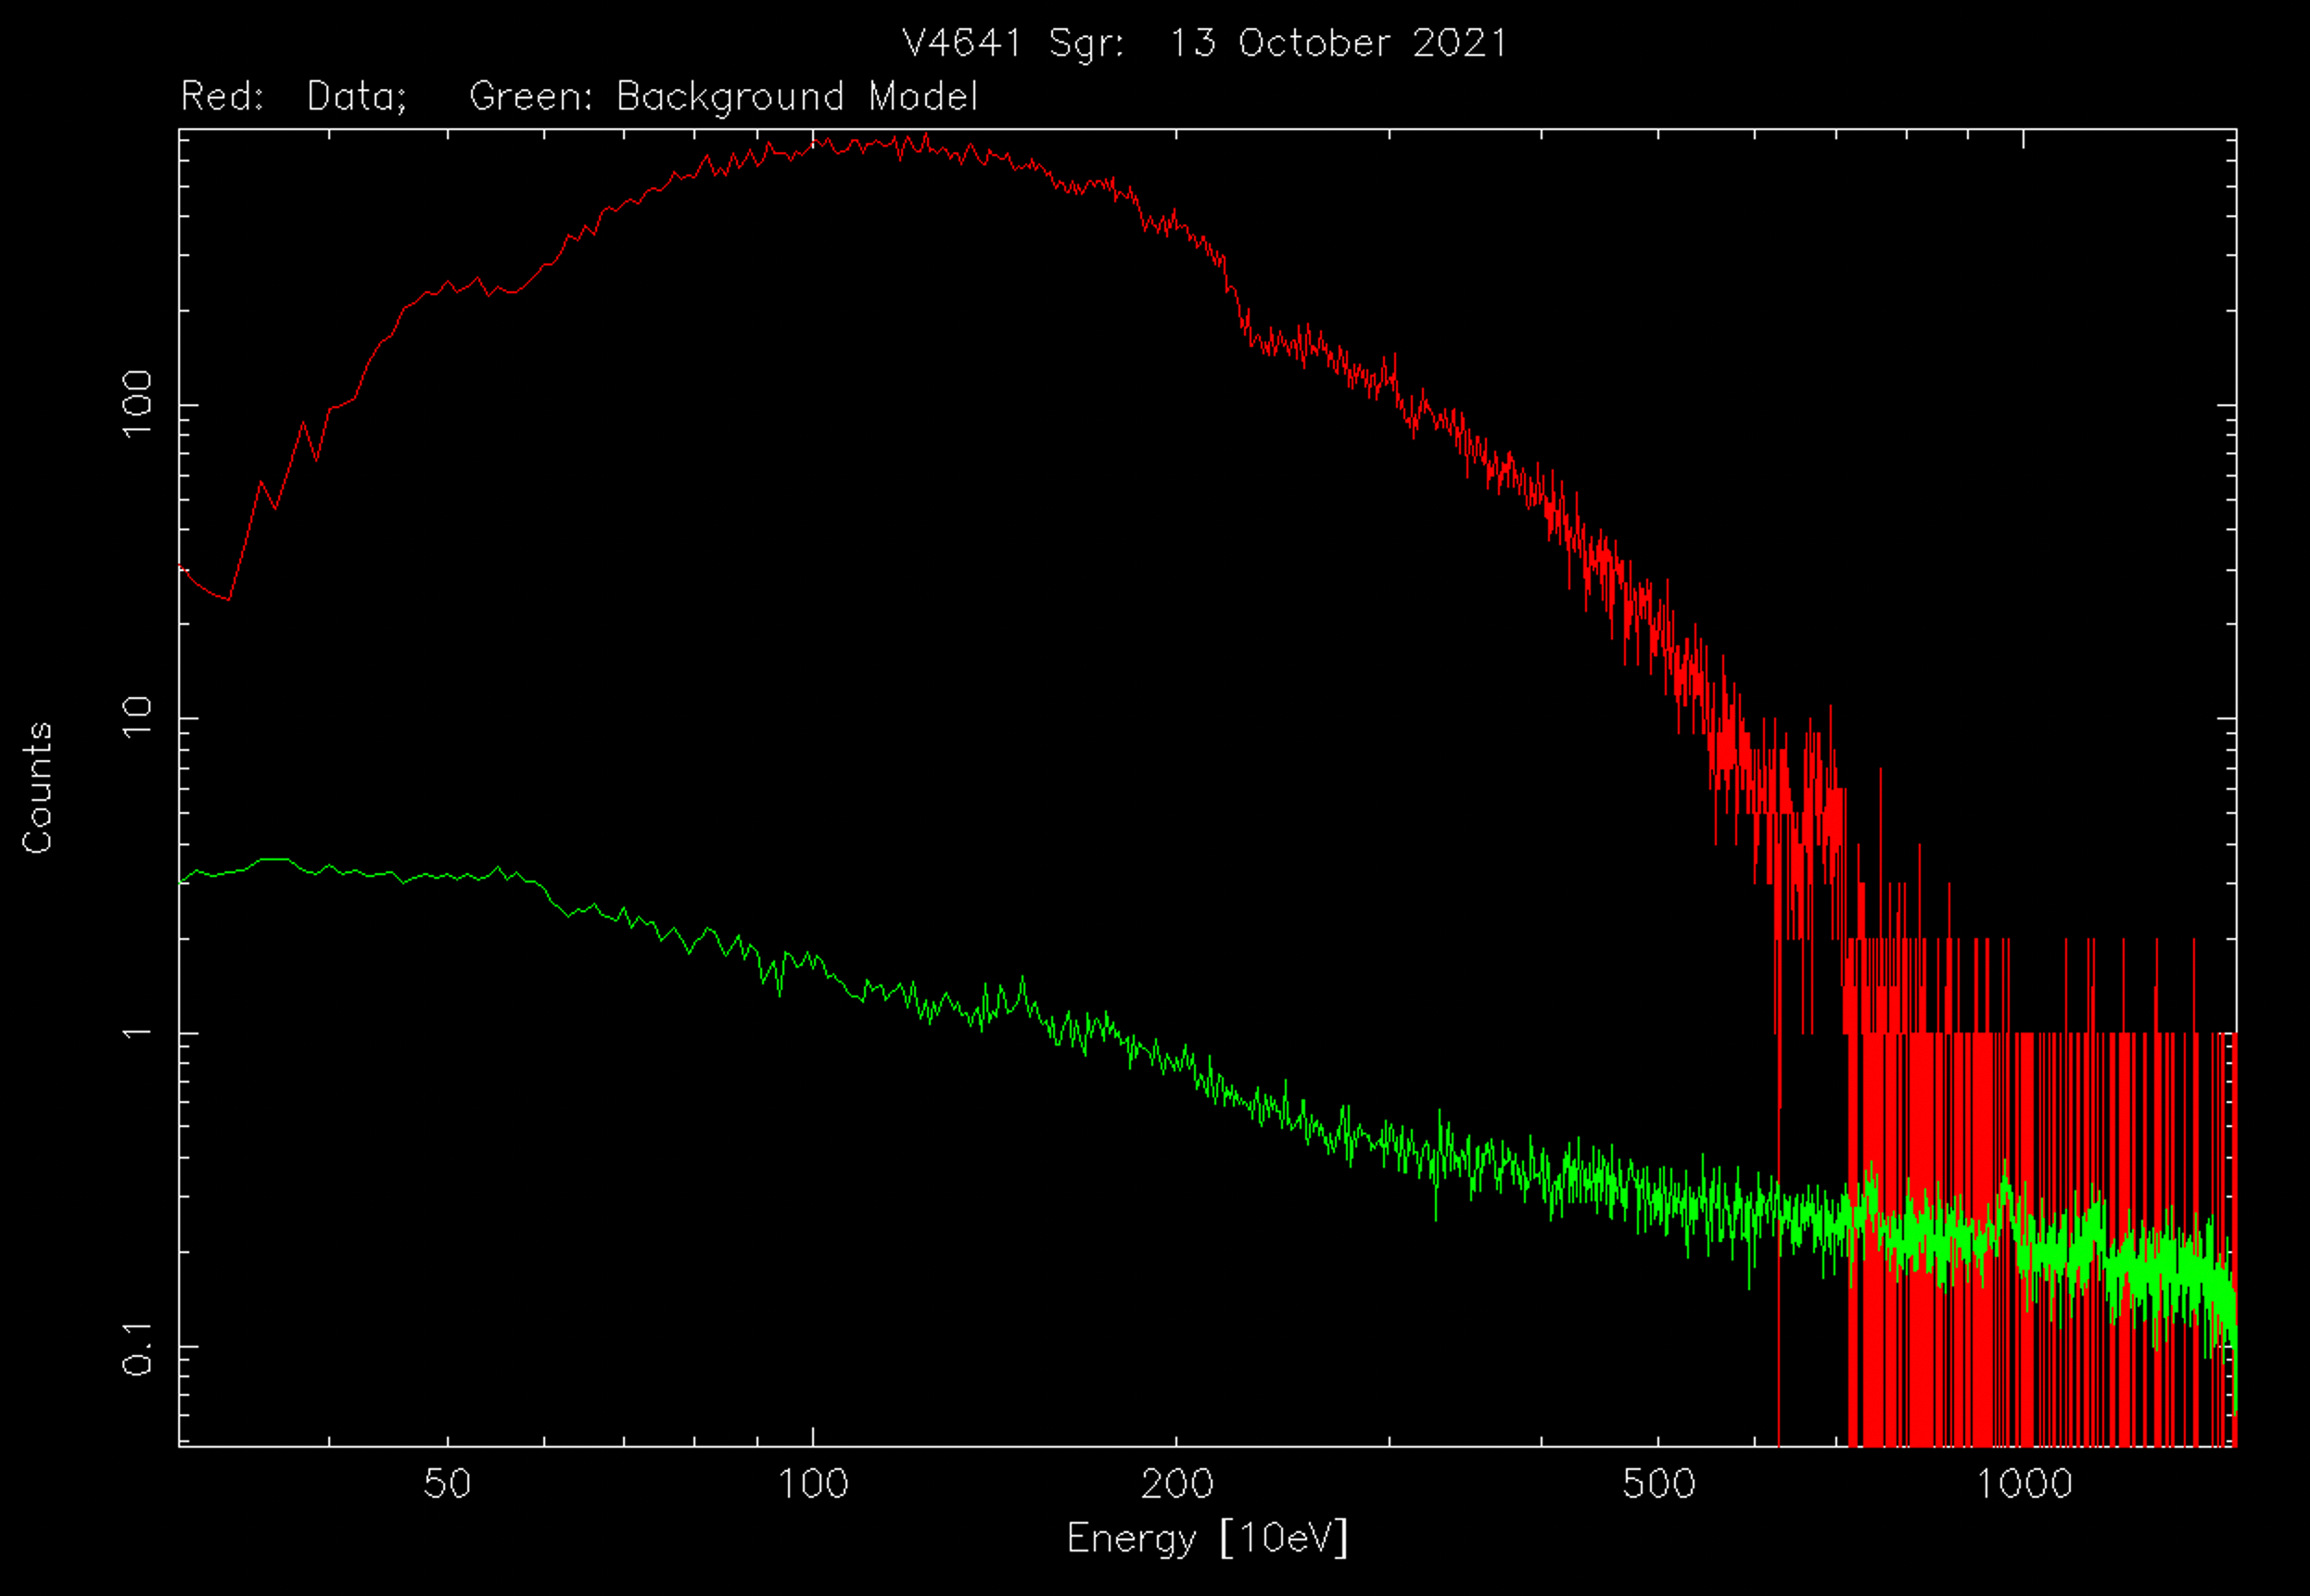  X-ray photon count spectrum from an initial NICER snapshot observation of V4641 Sgr. The enhancement between channels 650 and 700 (photon energies 6.5-7 keV) likely represents 6.4 keV line emission from highly ionized iron atoms, Doppler shifted to higher energies in an outflow that is moving partially toward us.